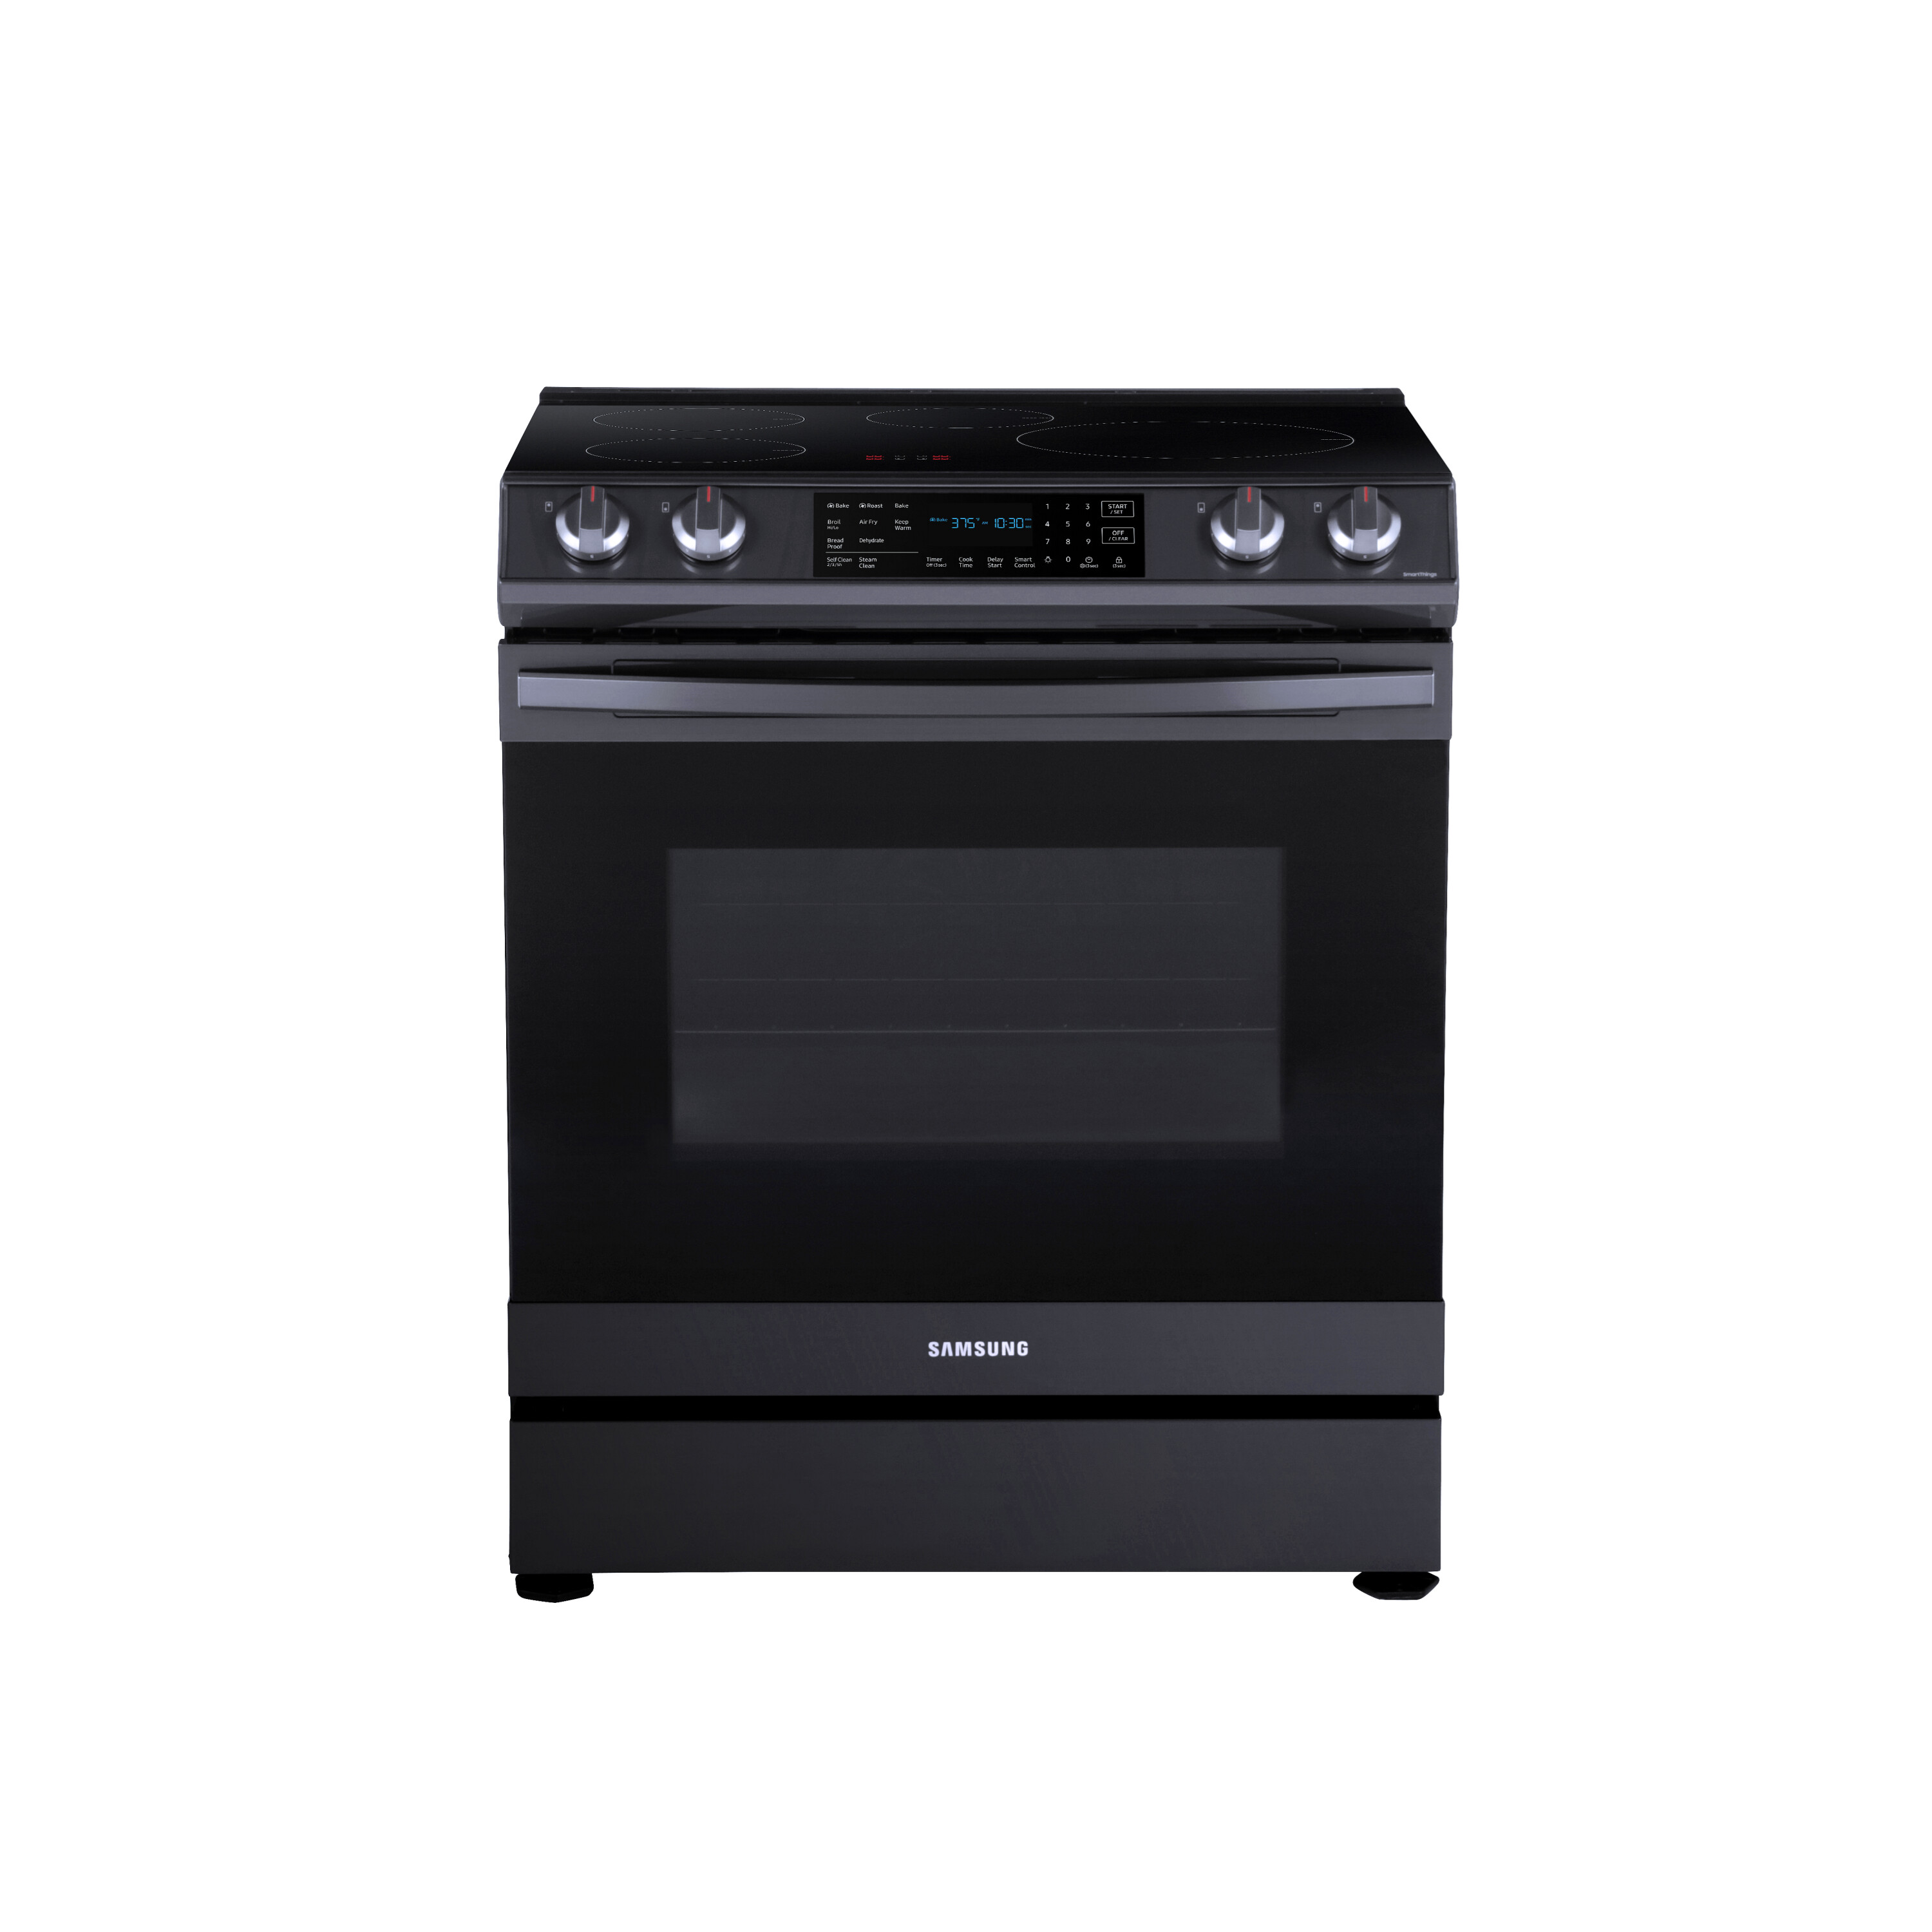 Samsung - 6.3 Cu. ft. Smart Instant Heat Slide-in Induction Range with Air Fry & Convection+ - Stainless Steel